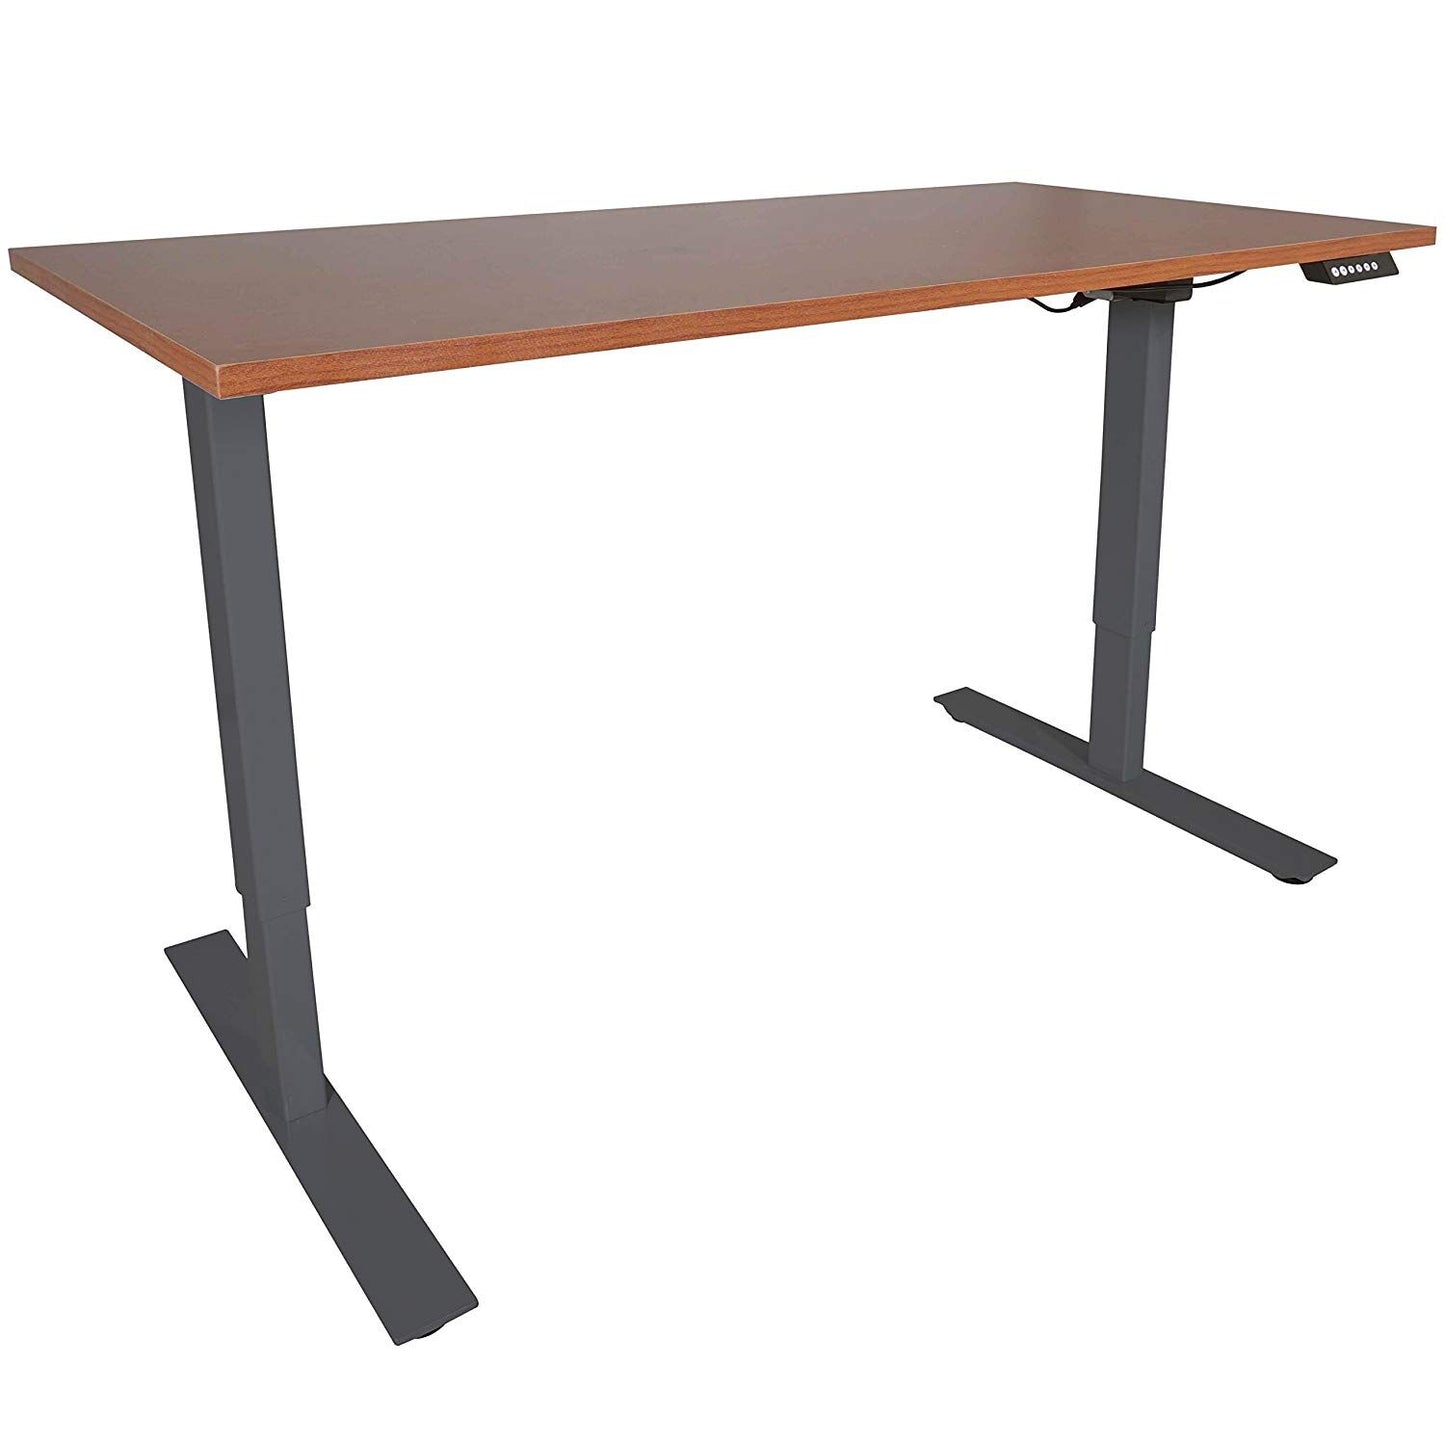 A2 Single Motor Sit/Stand Desk w/ Wood 30"x60" Top Conversion - view 1